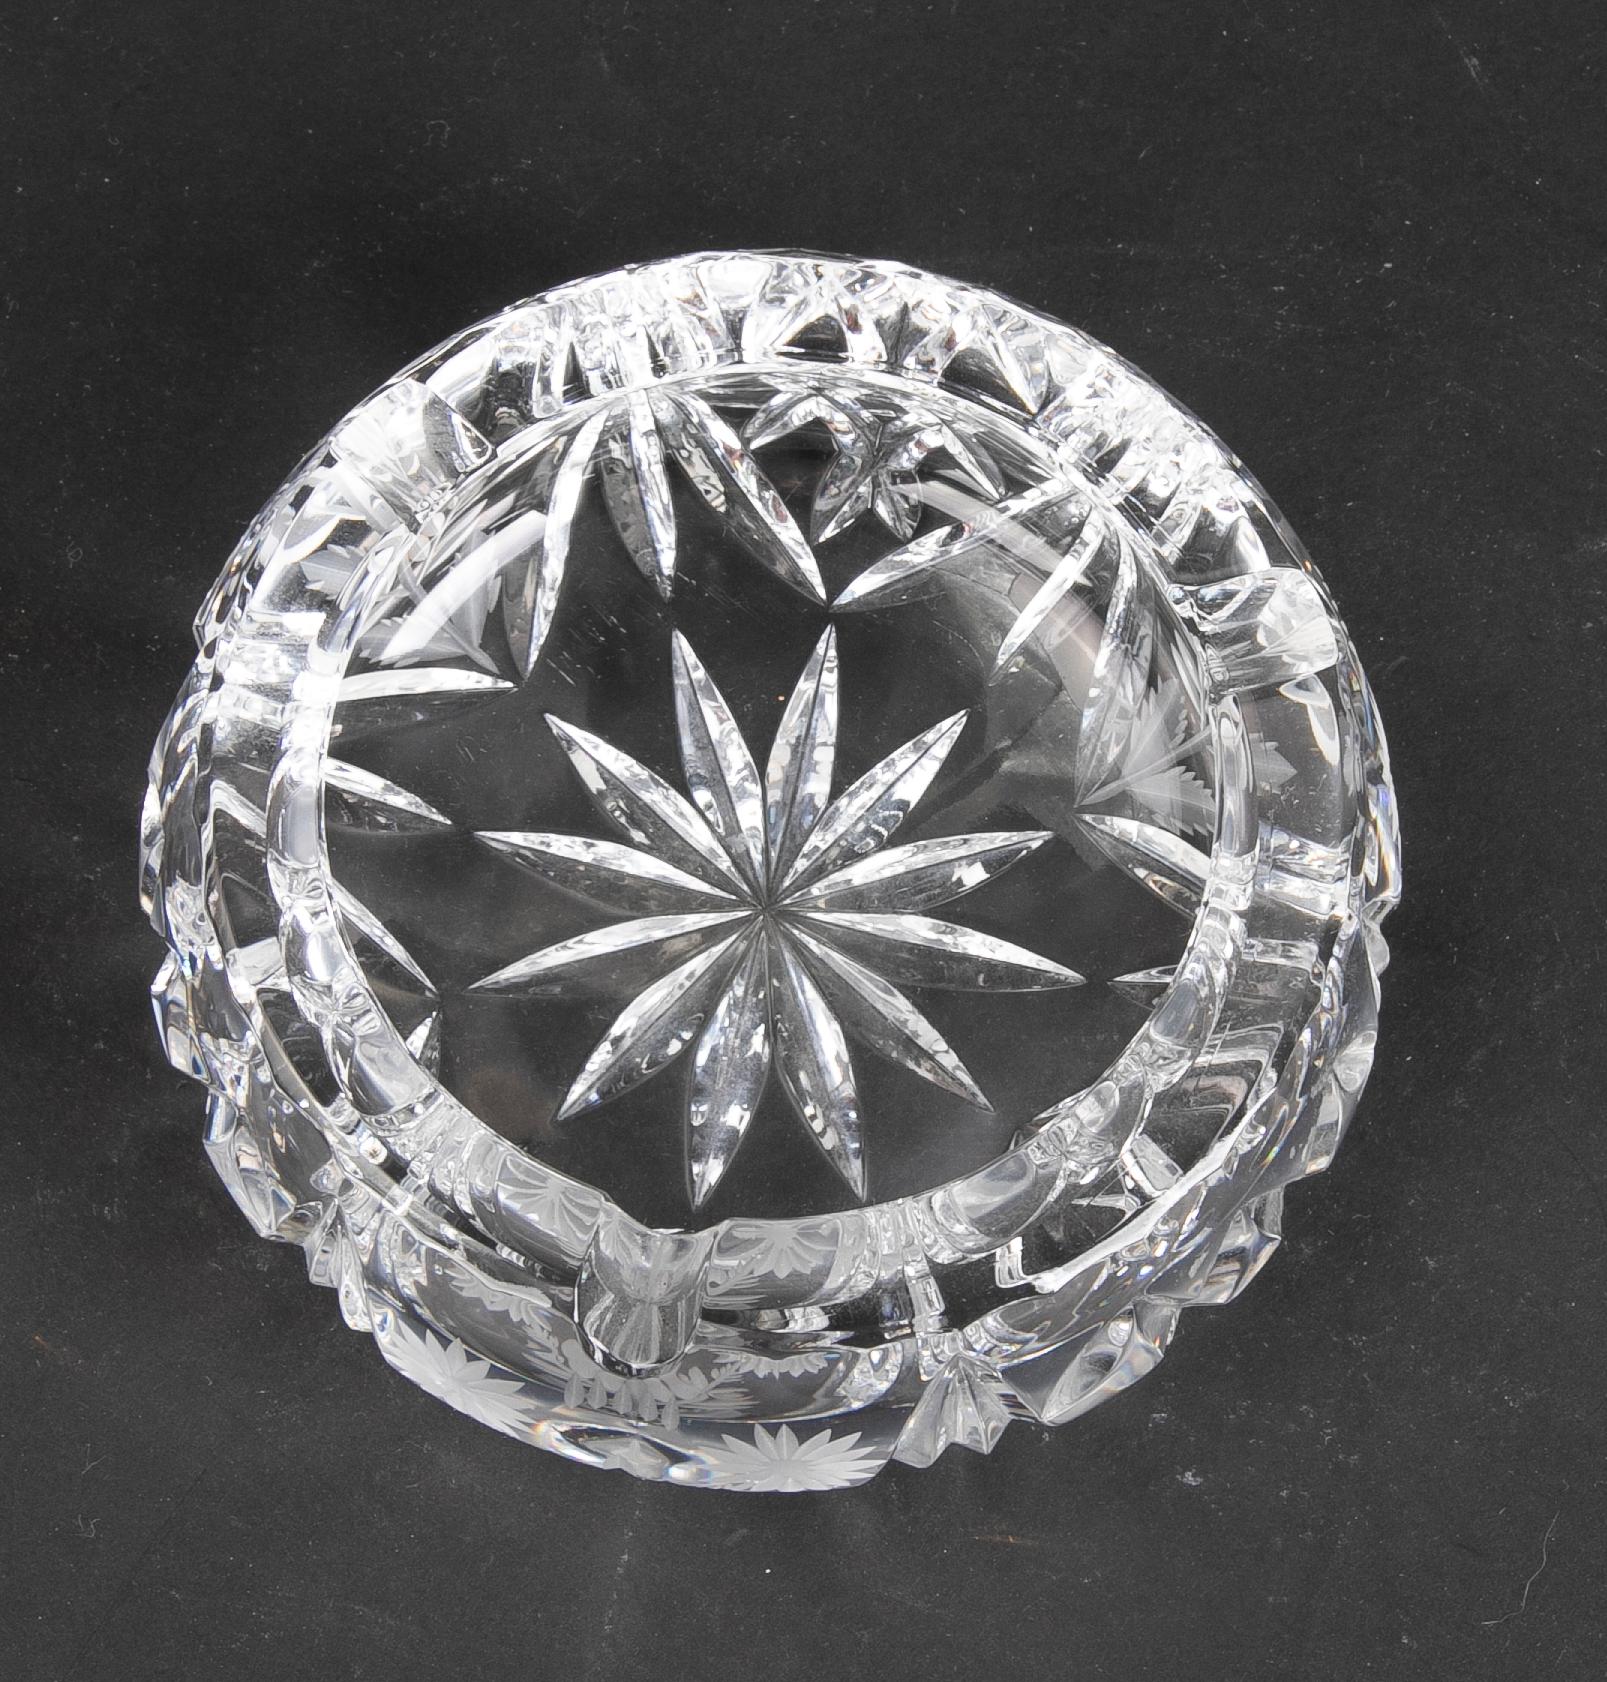 Solid ashtray made of hand-carved crystal.